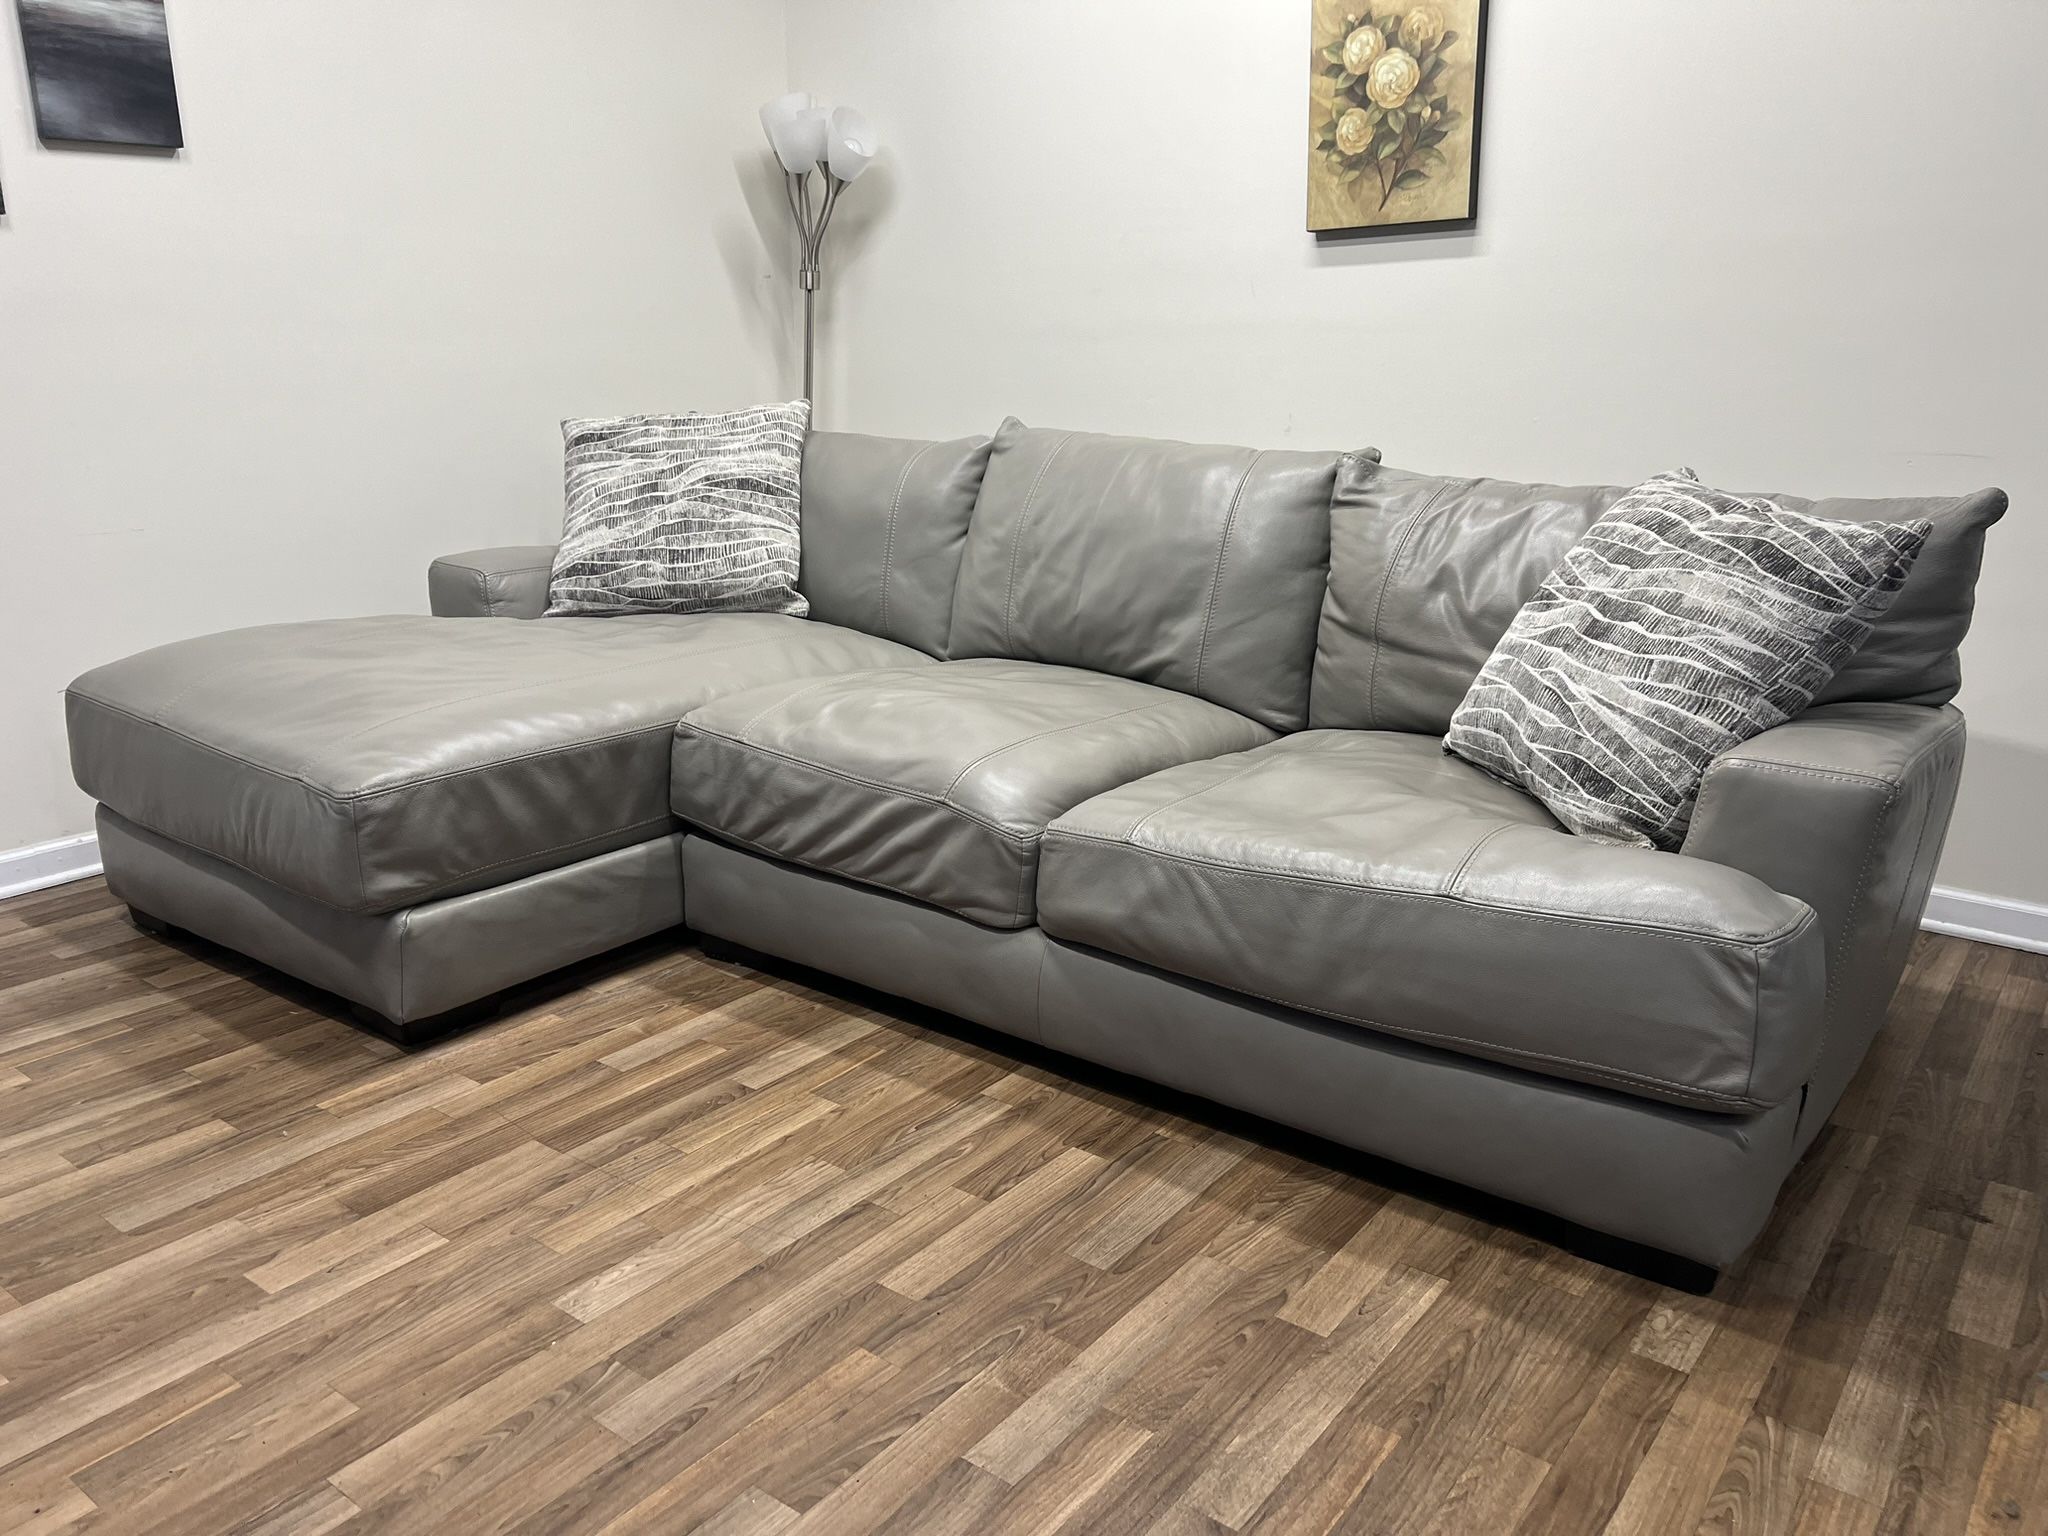 Gray Leather Sectional Sofa Raymour & Flanigan Furniture (Free Delivery Curbside)